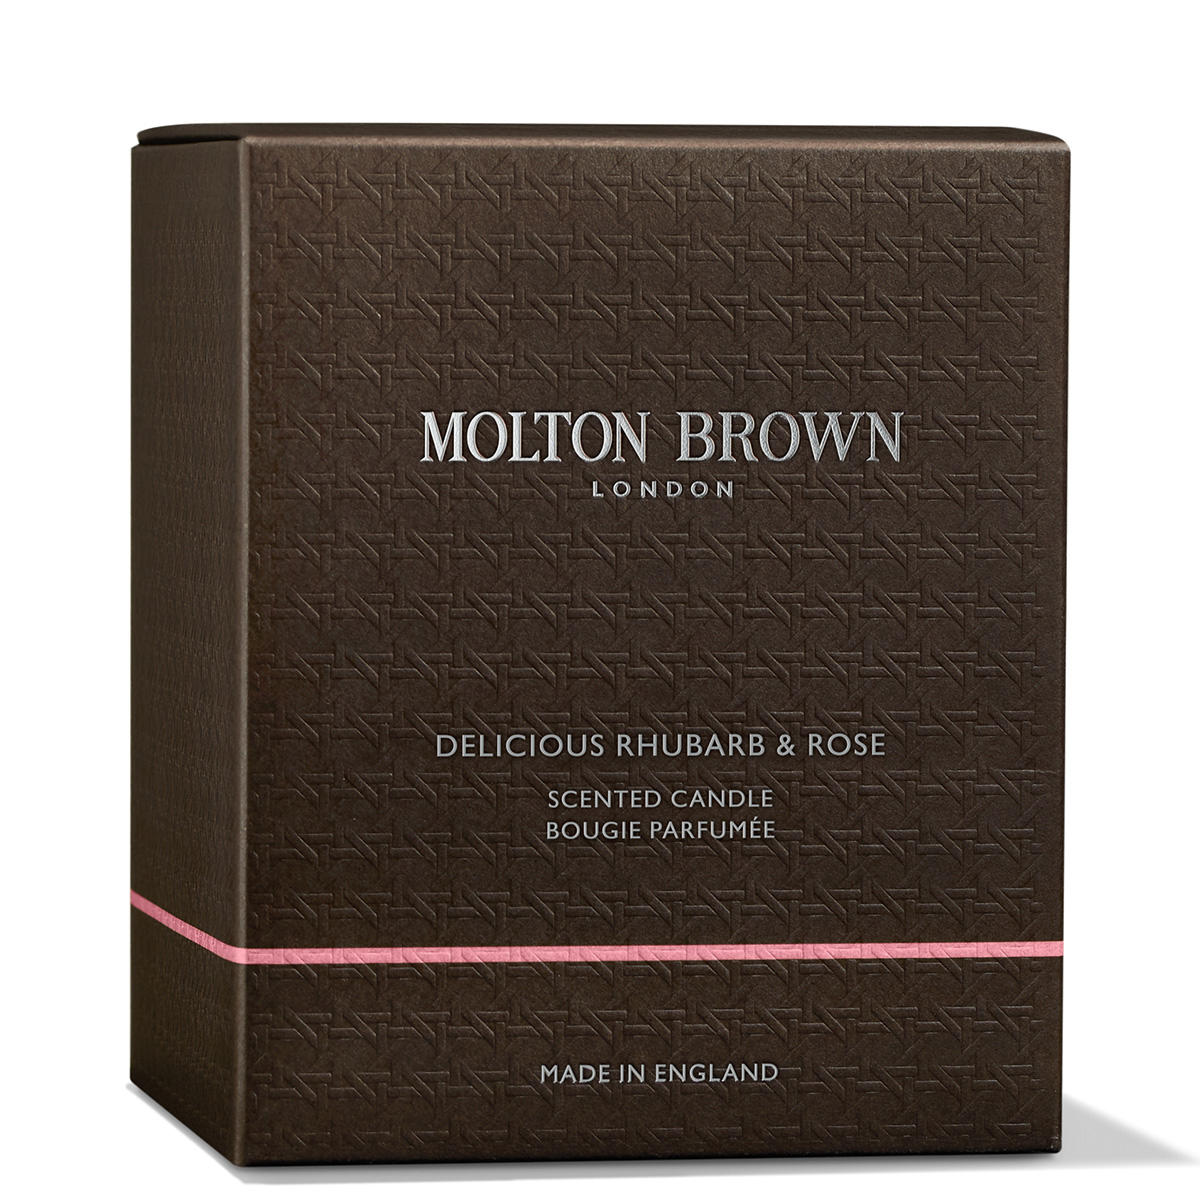 MOLTON BROWN Delicious Rhubarb & Rose Scented Candle 190 g - 4